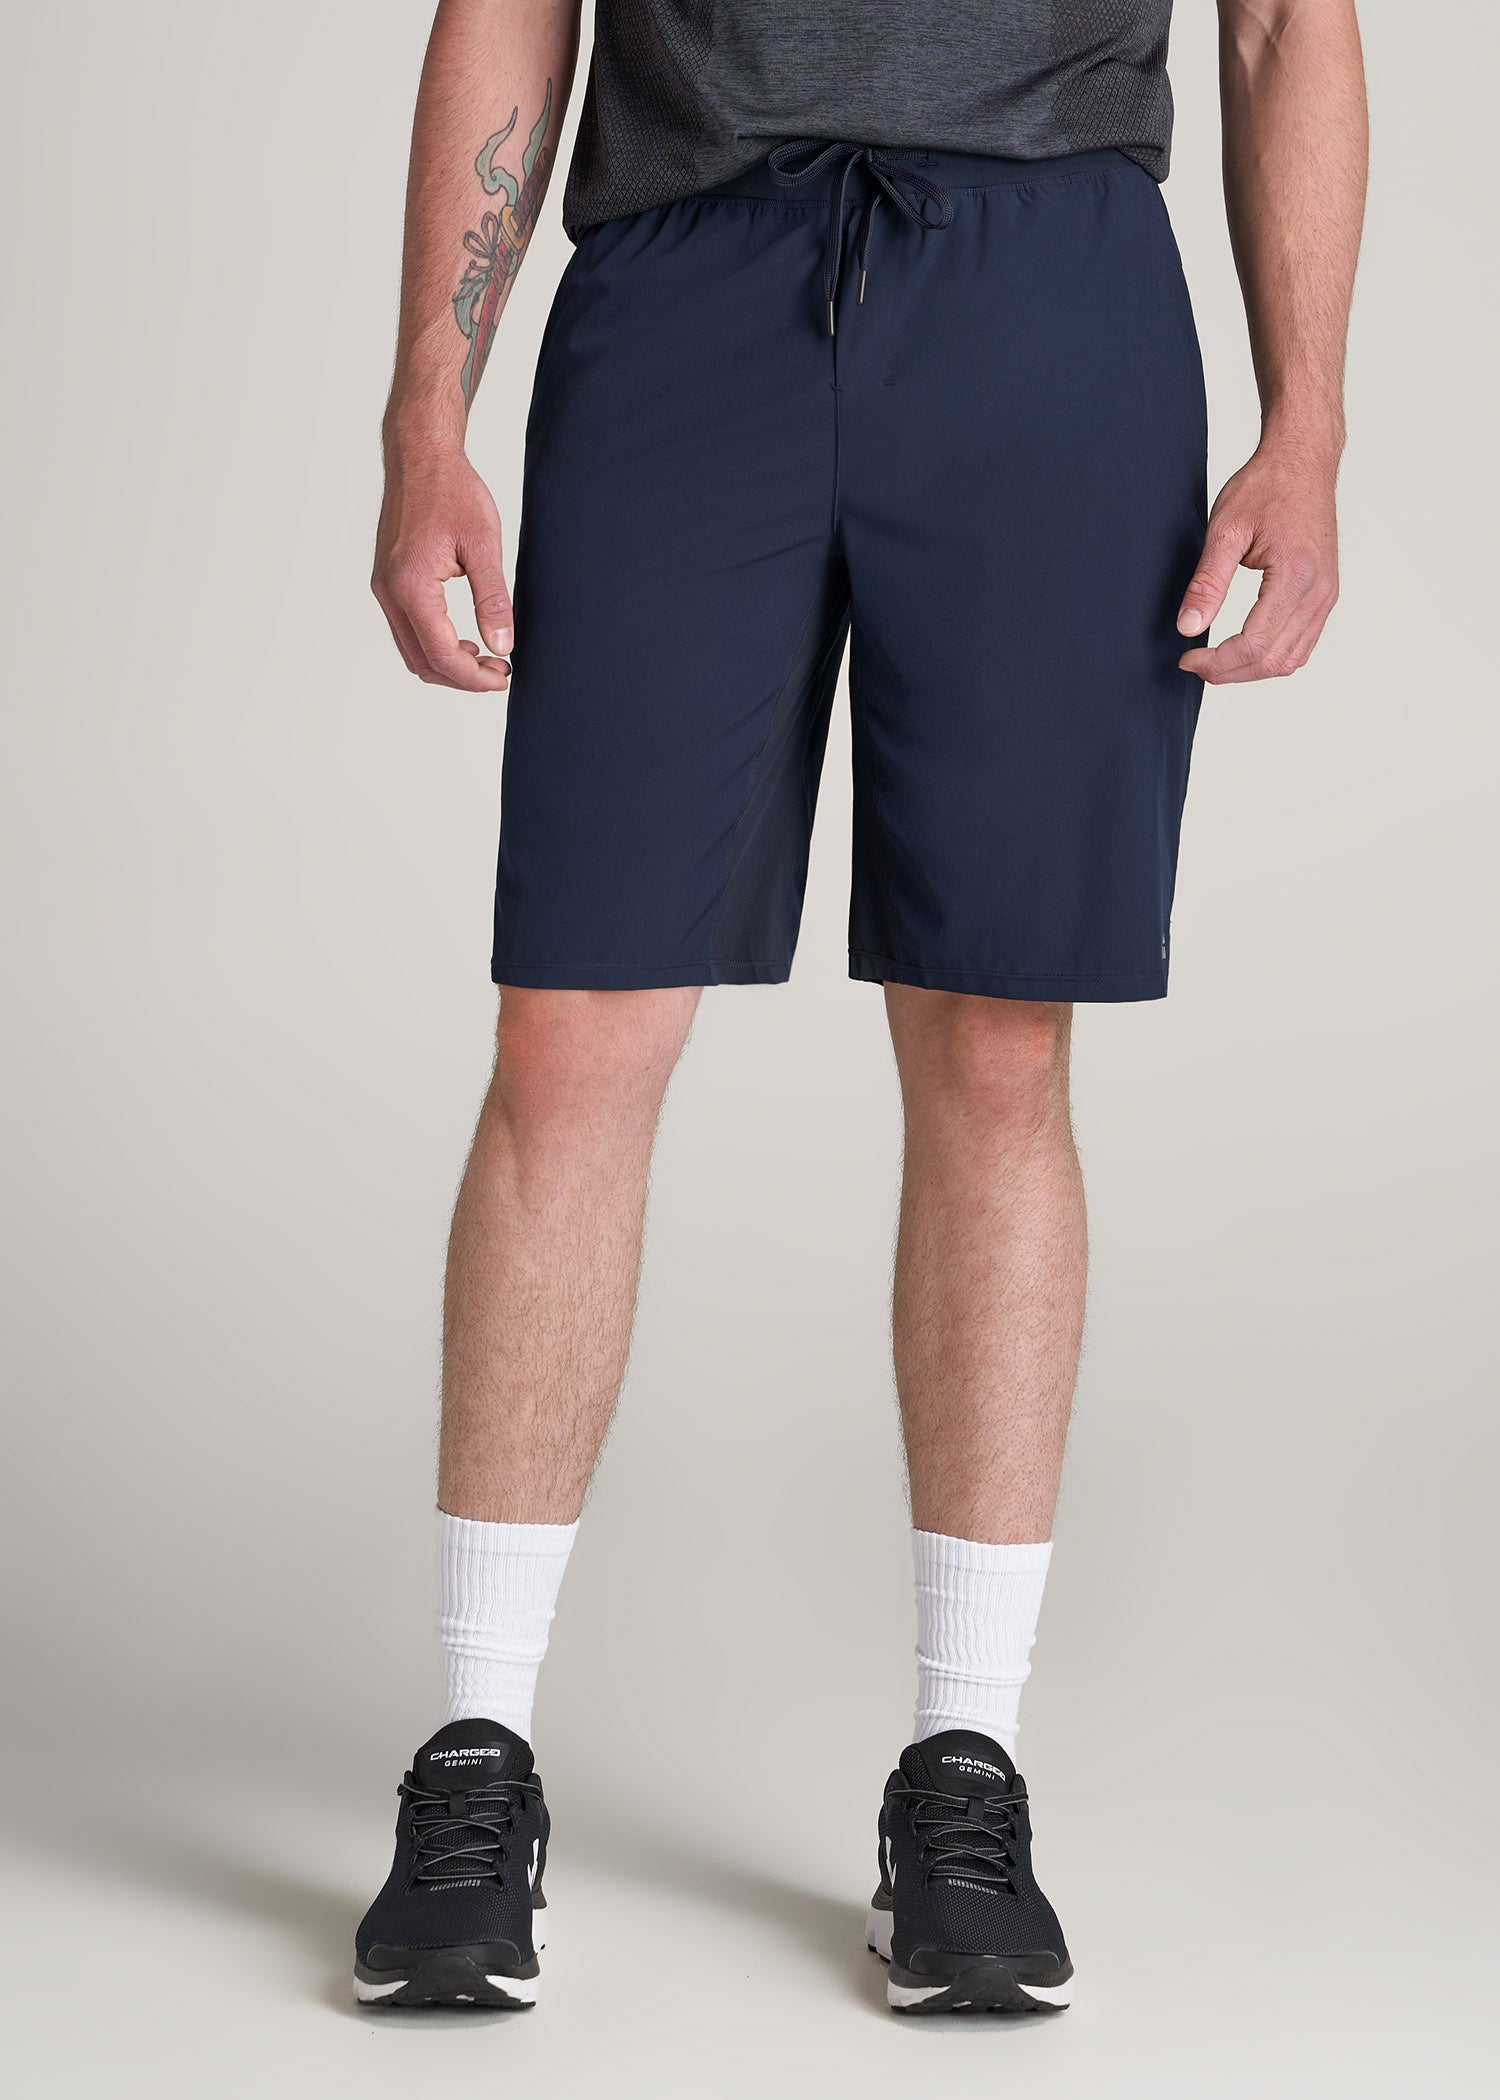 Men's Tall A.T. Performance Woven Stretch Shorts - Navy